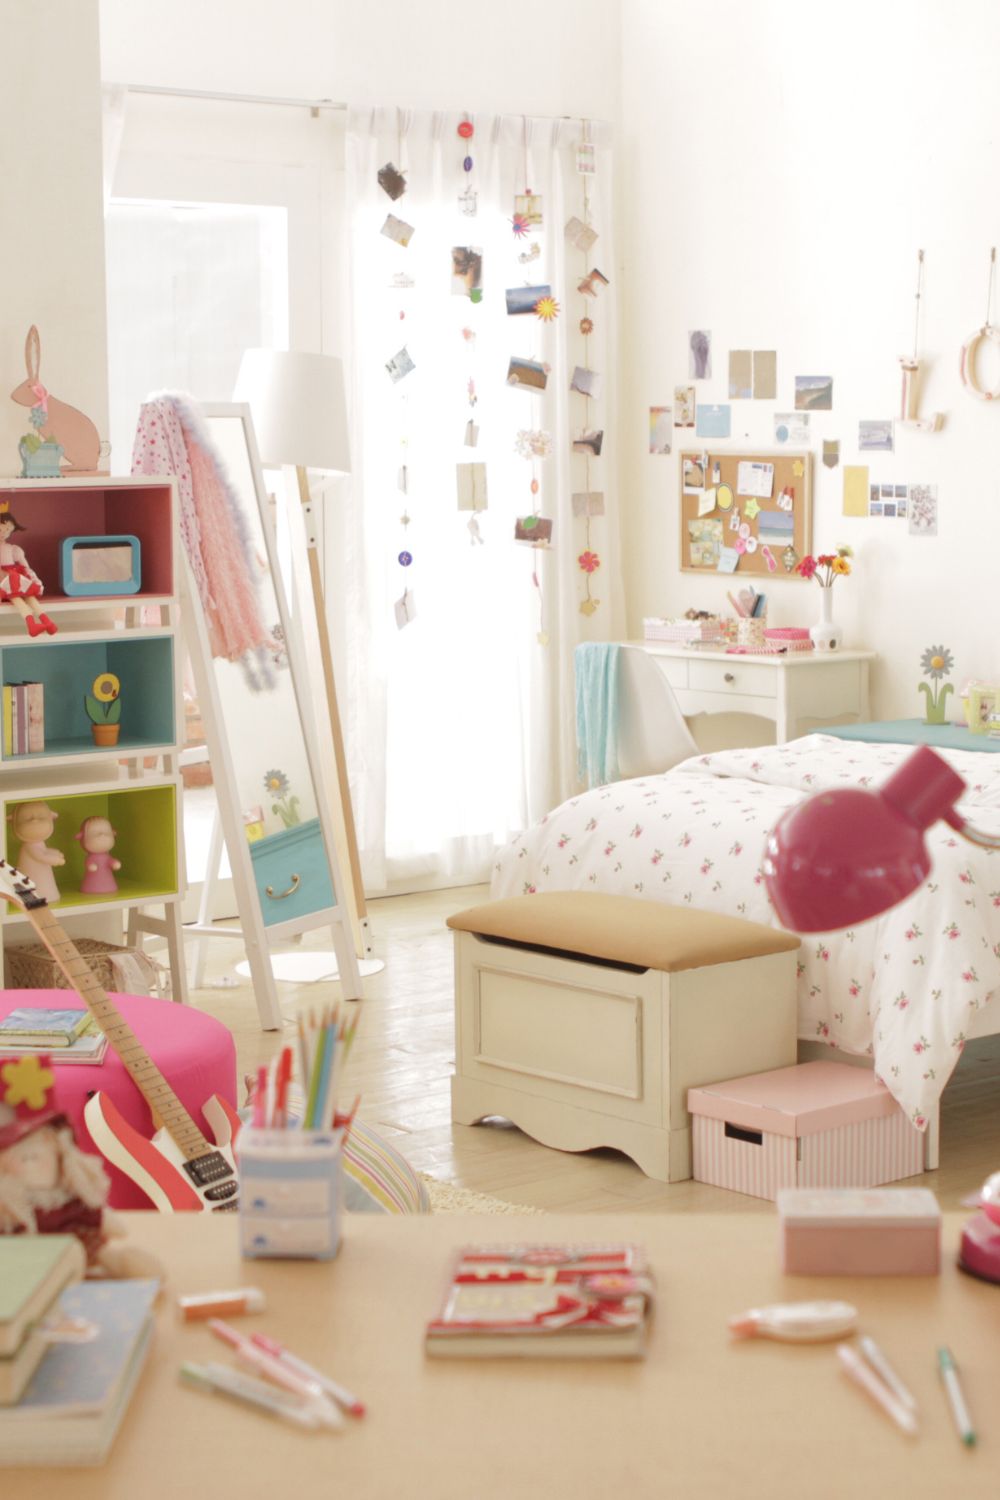 How to Successfully Redecorate Your Teens Bedroom